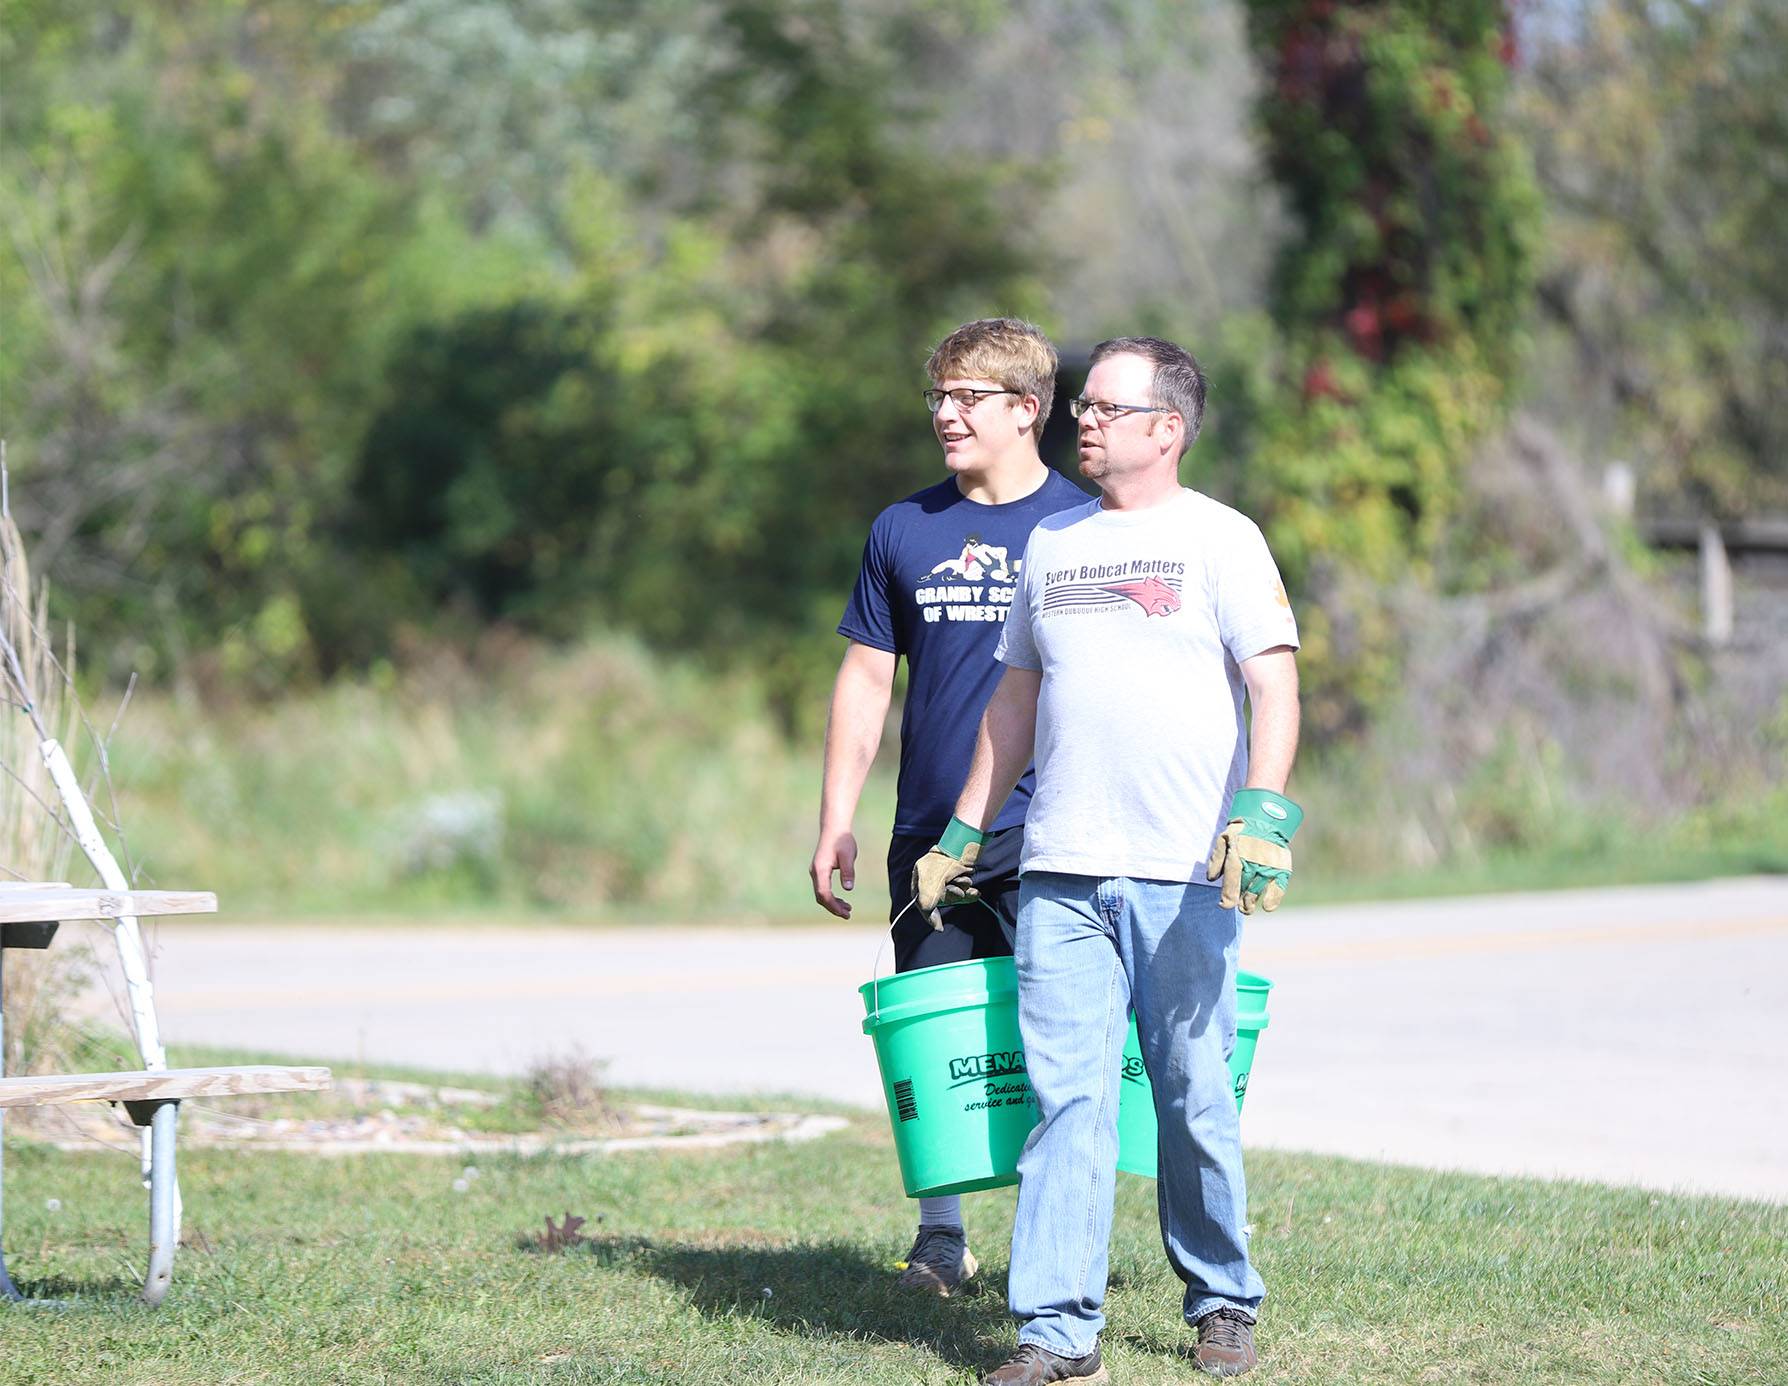 WDHS - Evan Surface and Mr Lucas doing community service